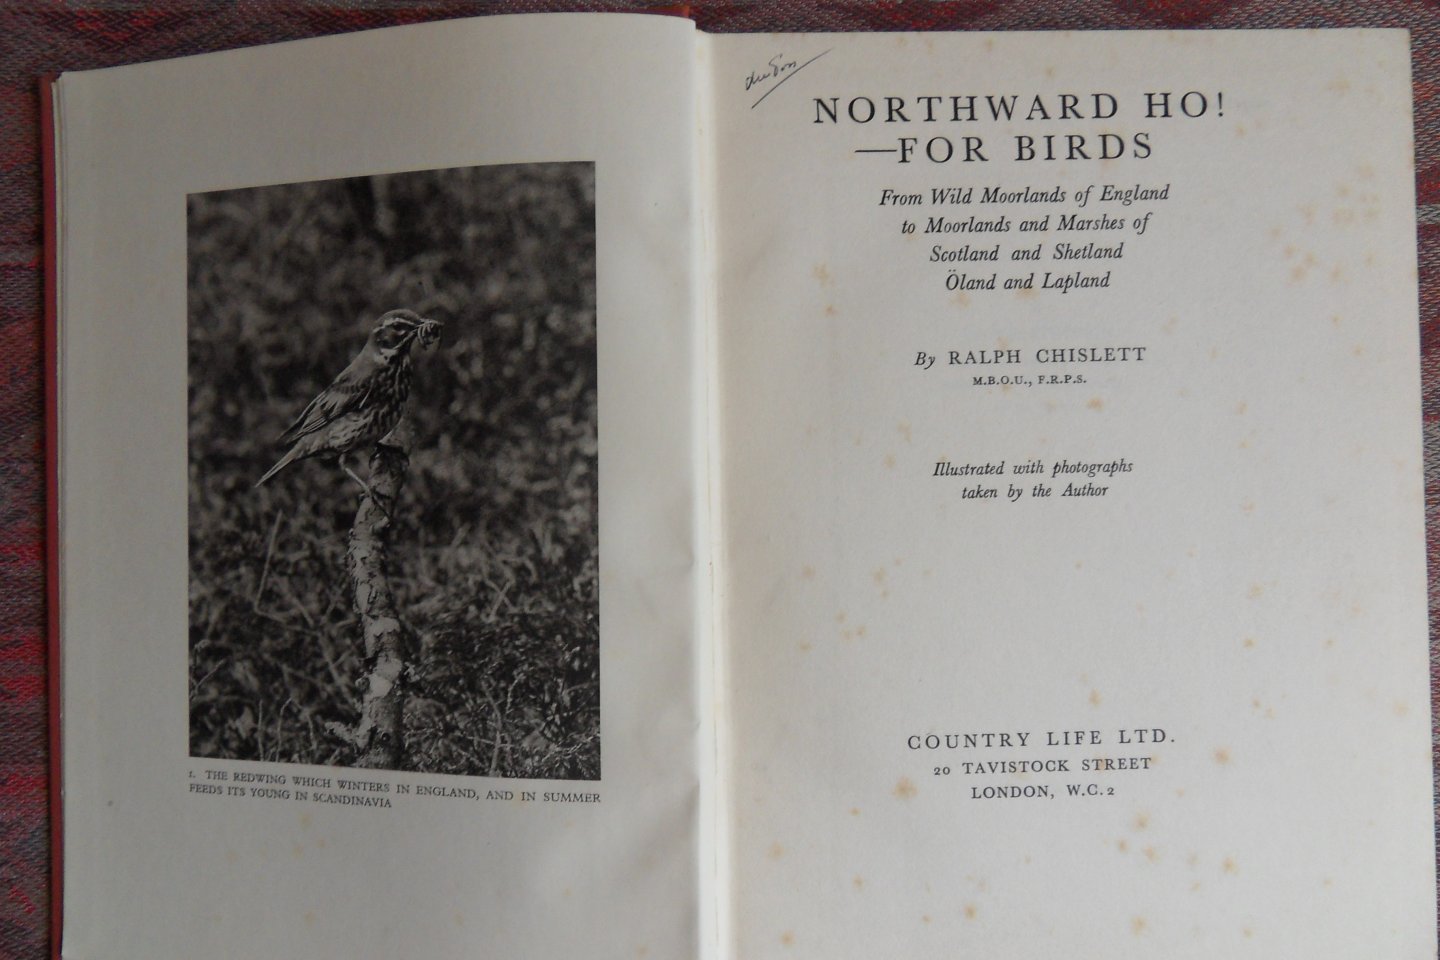 Chislett, Ralph. - Northward Ho! - For Birds. - From Wild Moorlands of England to Moorlands and Marshes of Scotland and Shetland Öland and Lapland.